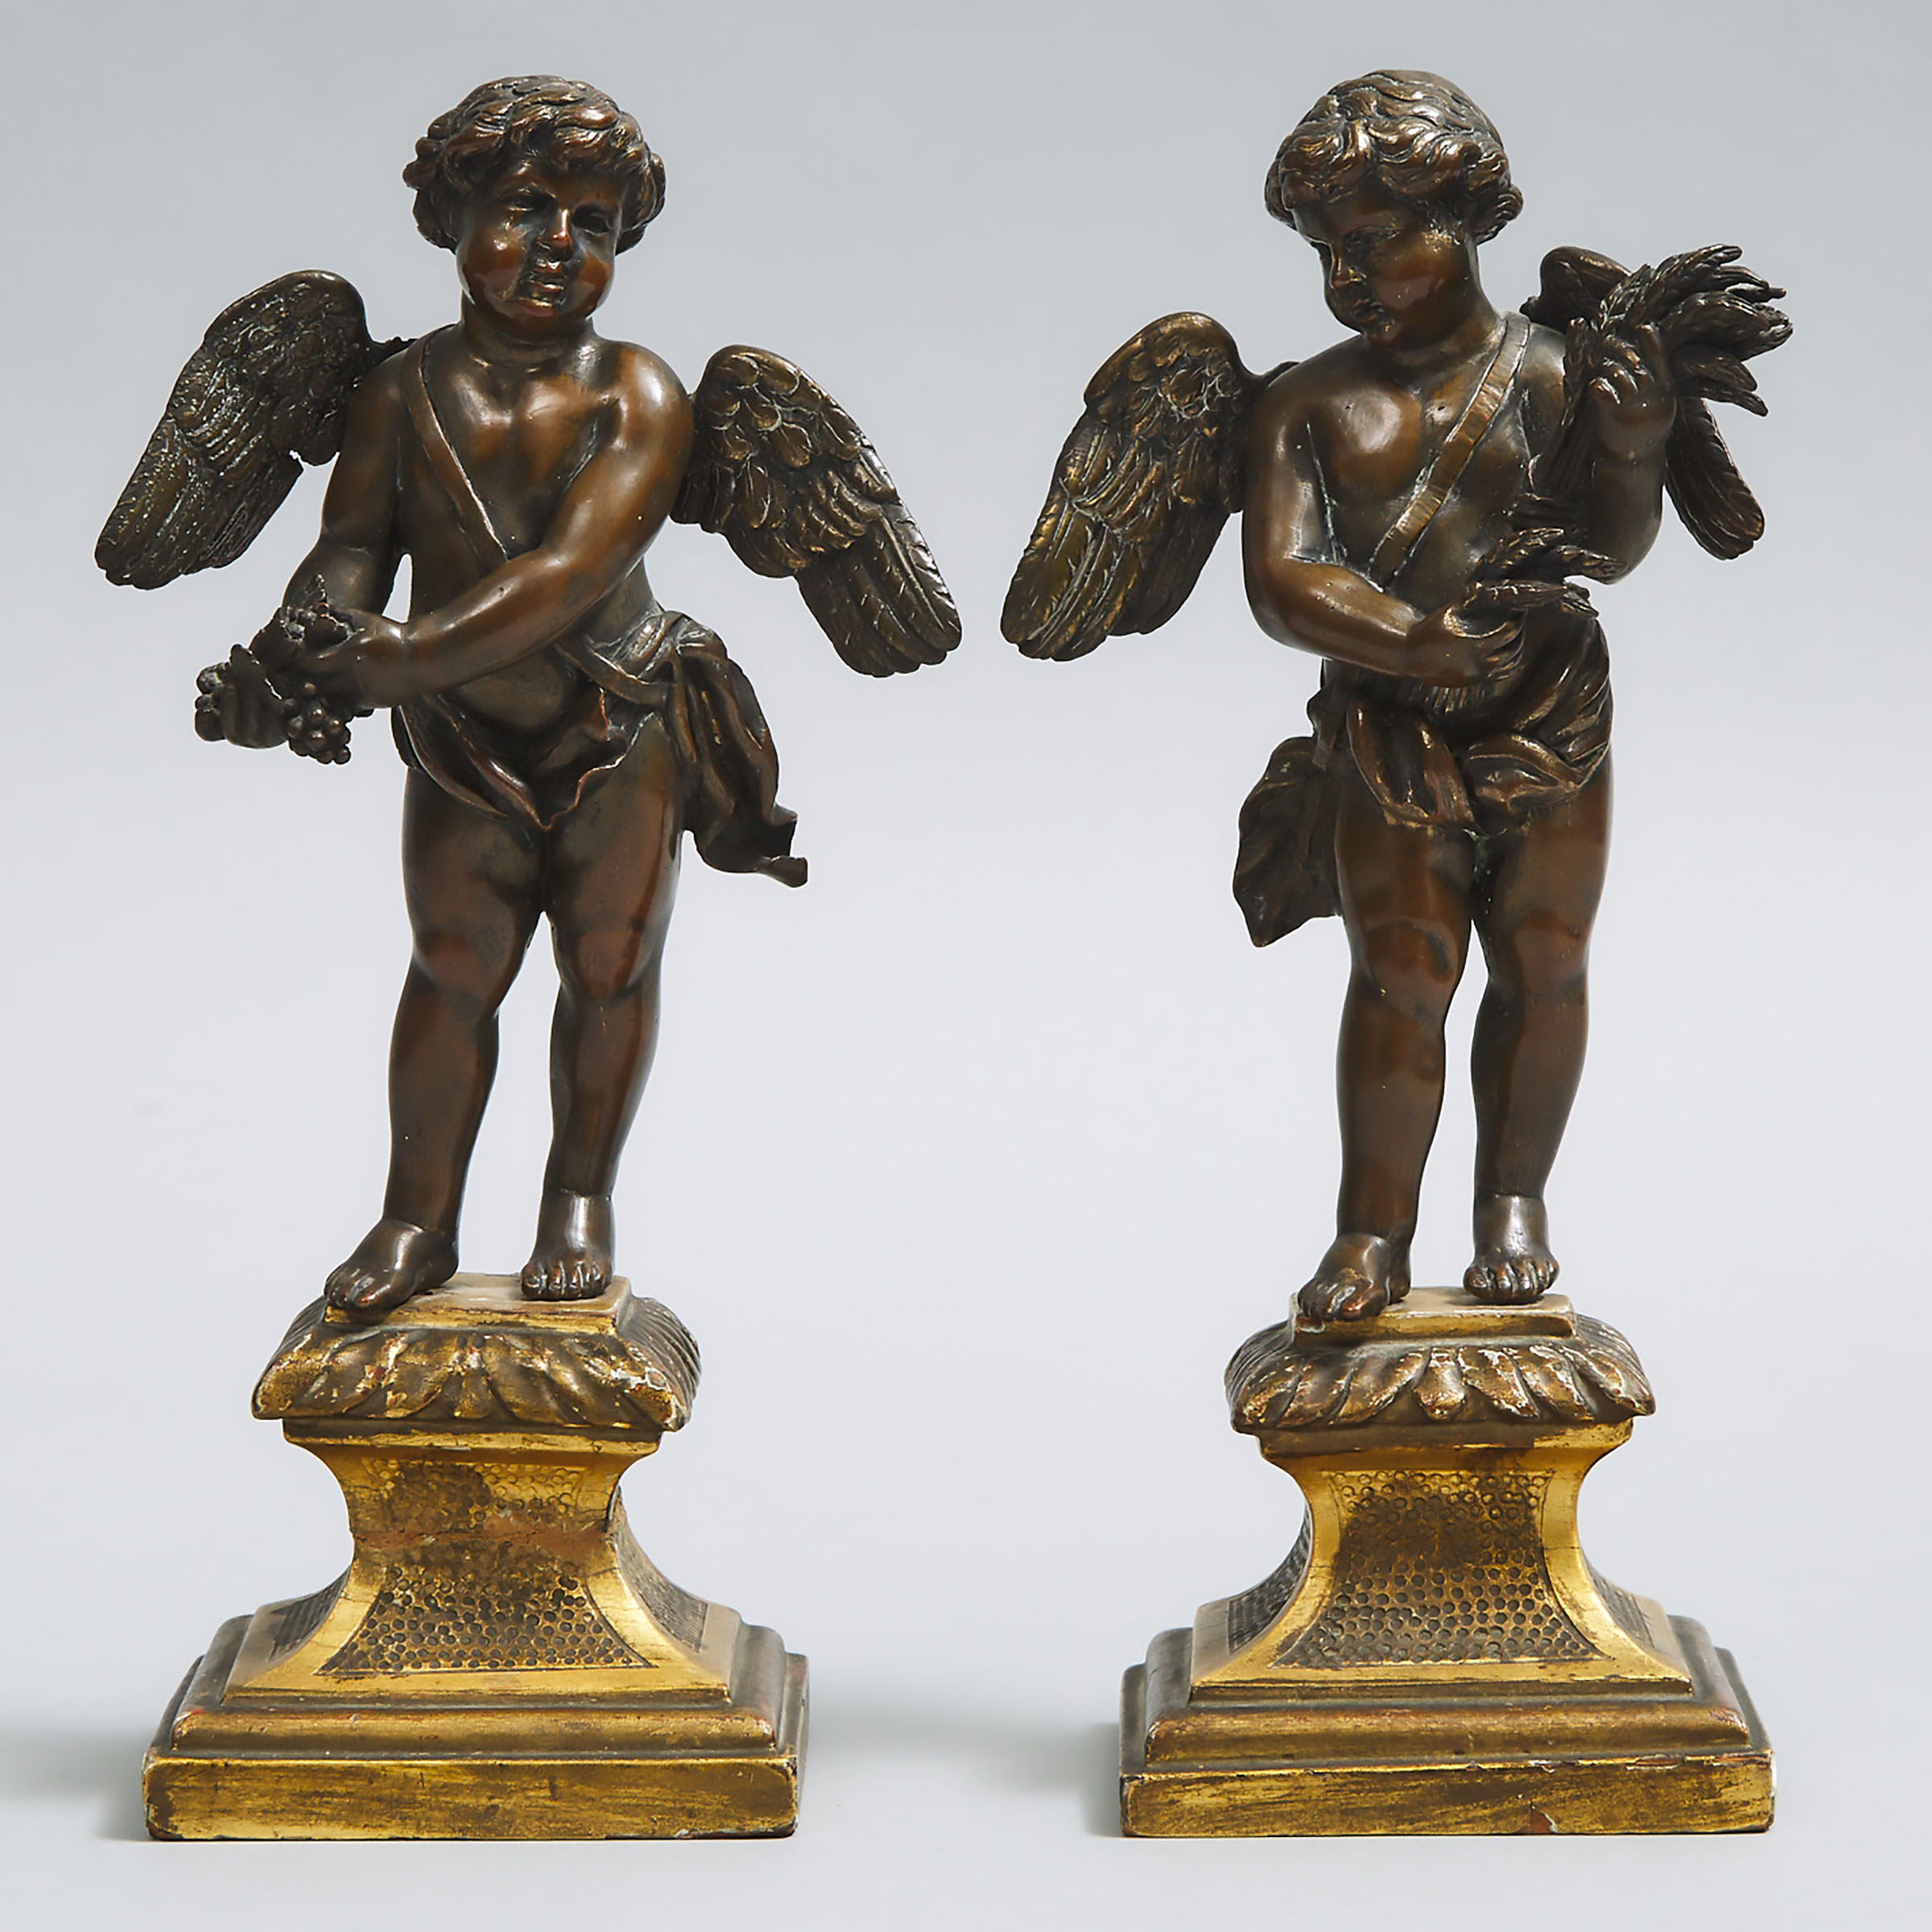 Pair of Italian Patinated Bronze Allegorical Cherubic Figures of Summer and Autumn, 18th/19th century